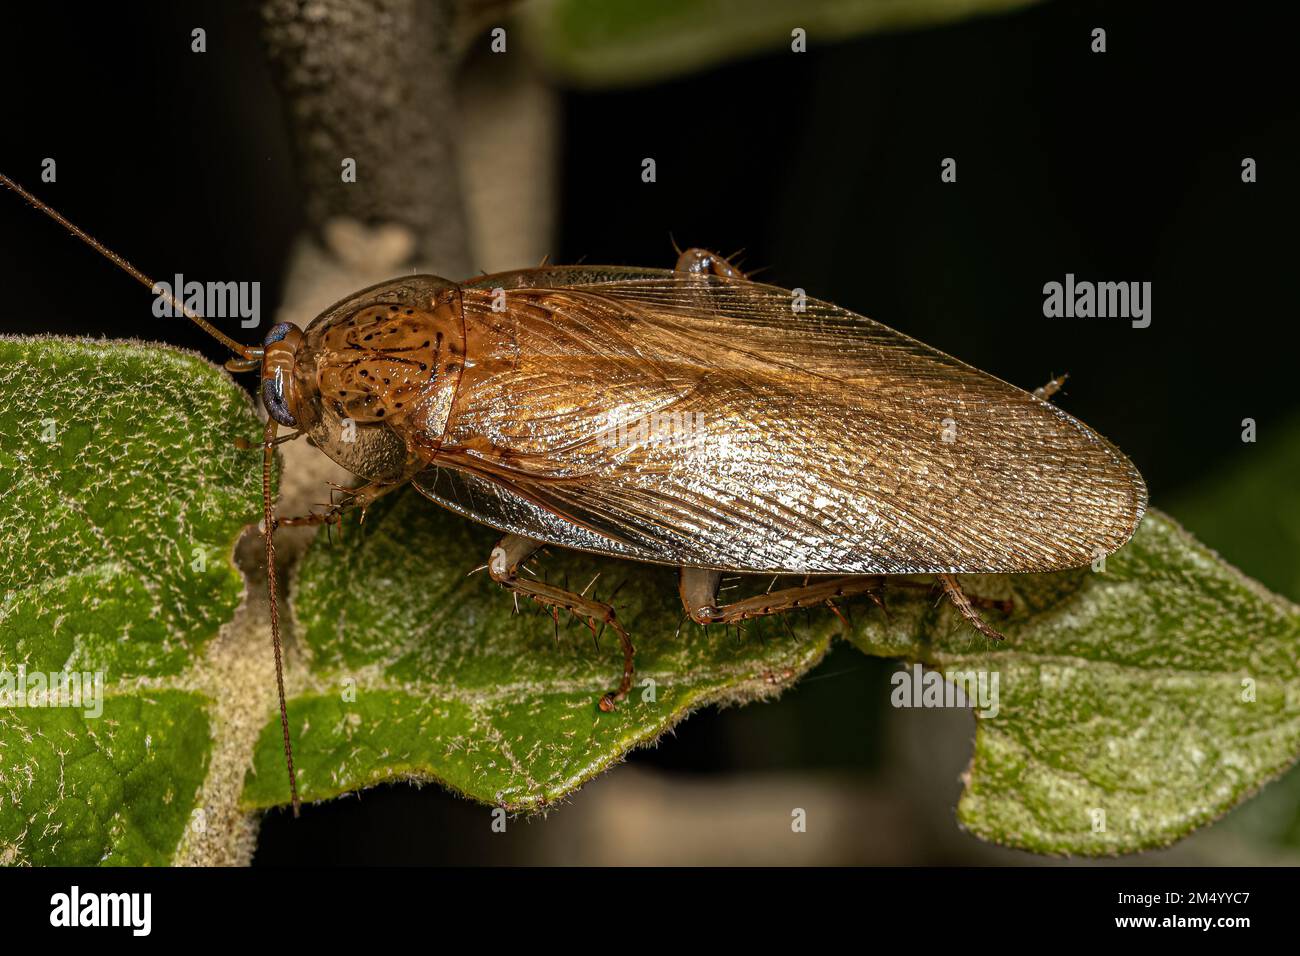 Adult Wood Cockroach of the Family Ectobiidae Stock Photo